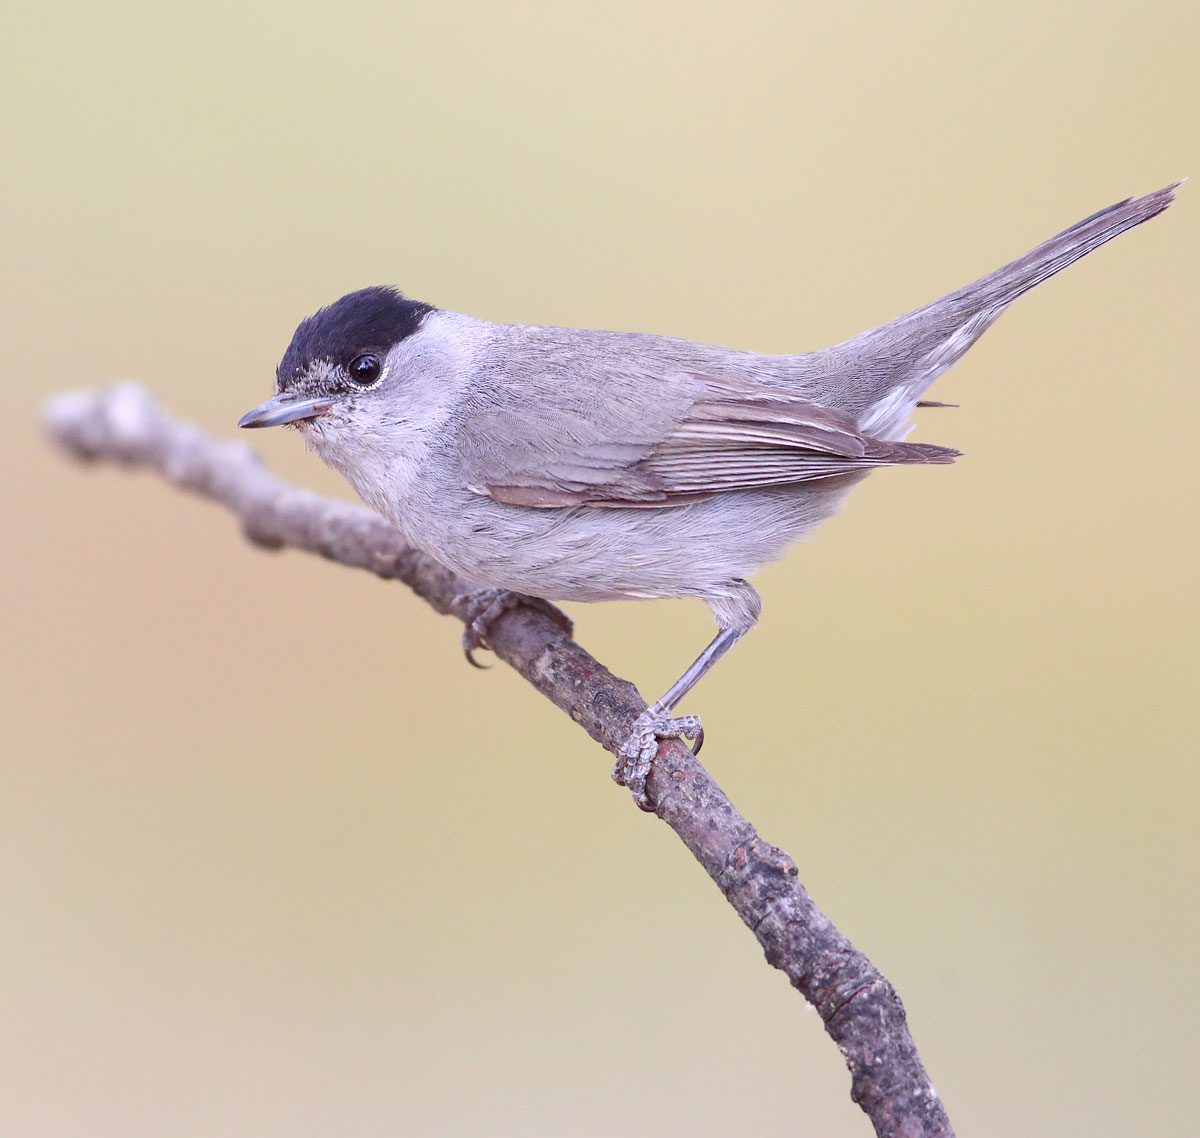 Eurasian Blackcaps are spunky little birds that look a bit like smaller versions of North American catbirds. Photo by Carlos Bocos/Macaulay Library.